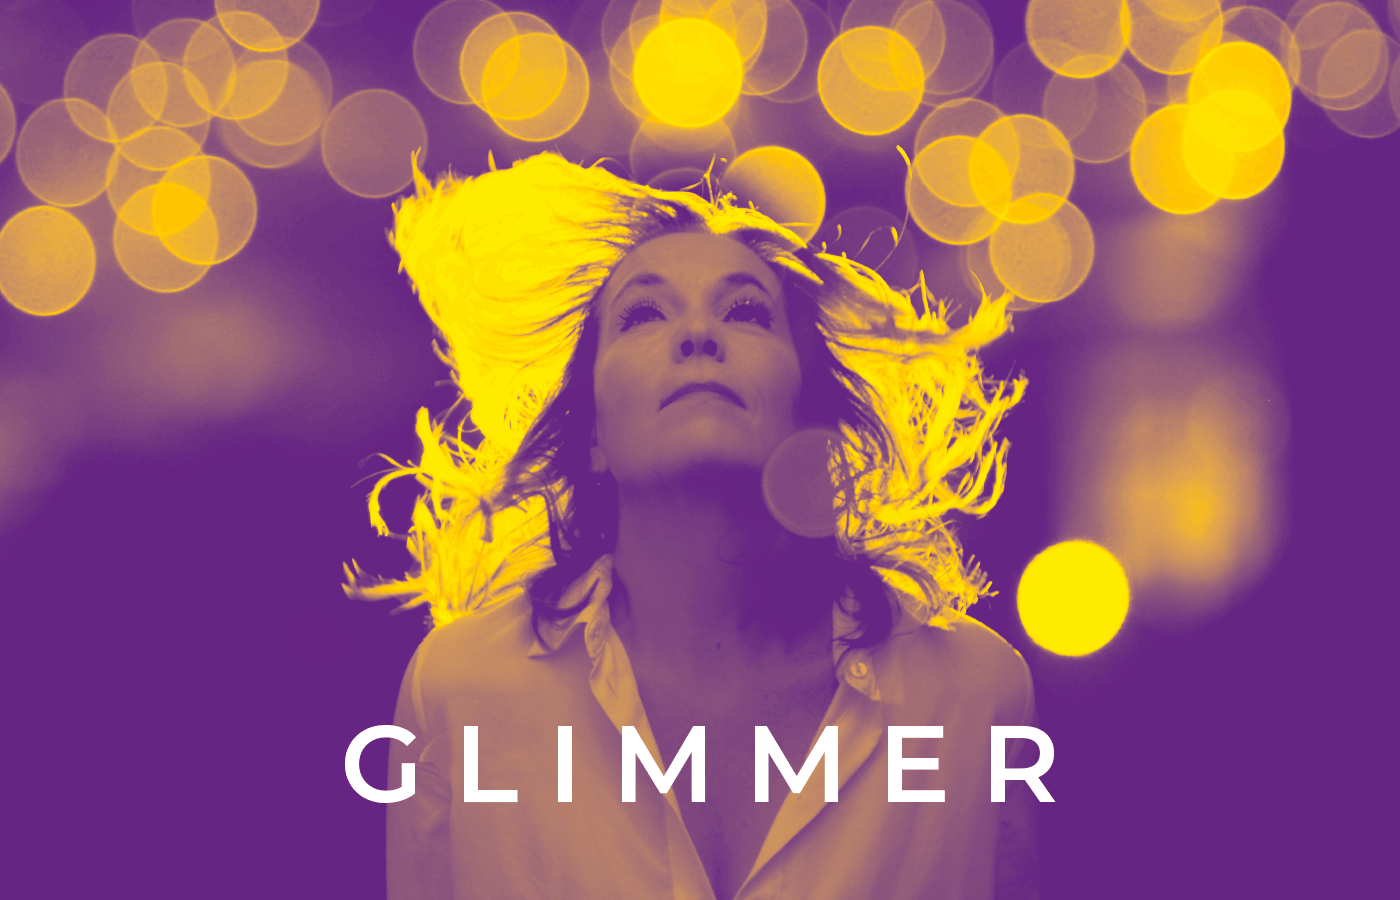 Glimmer by Dave Foster Band